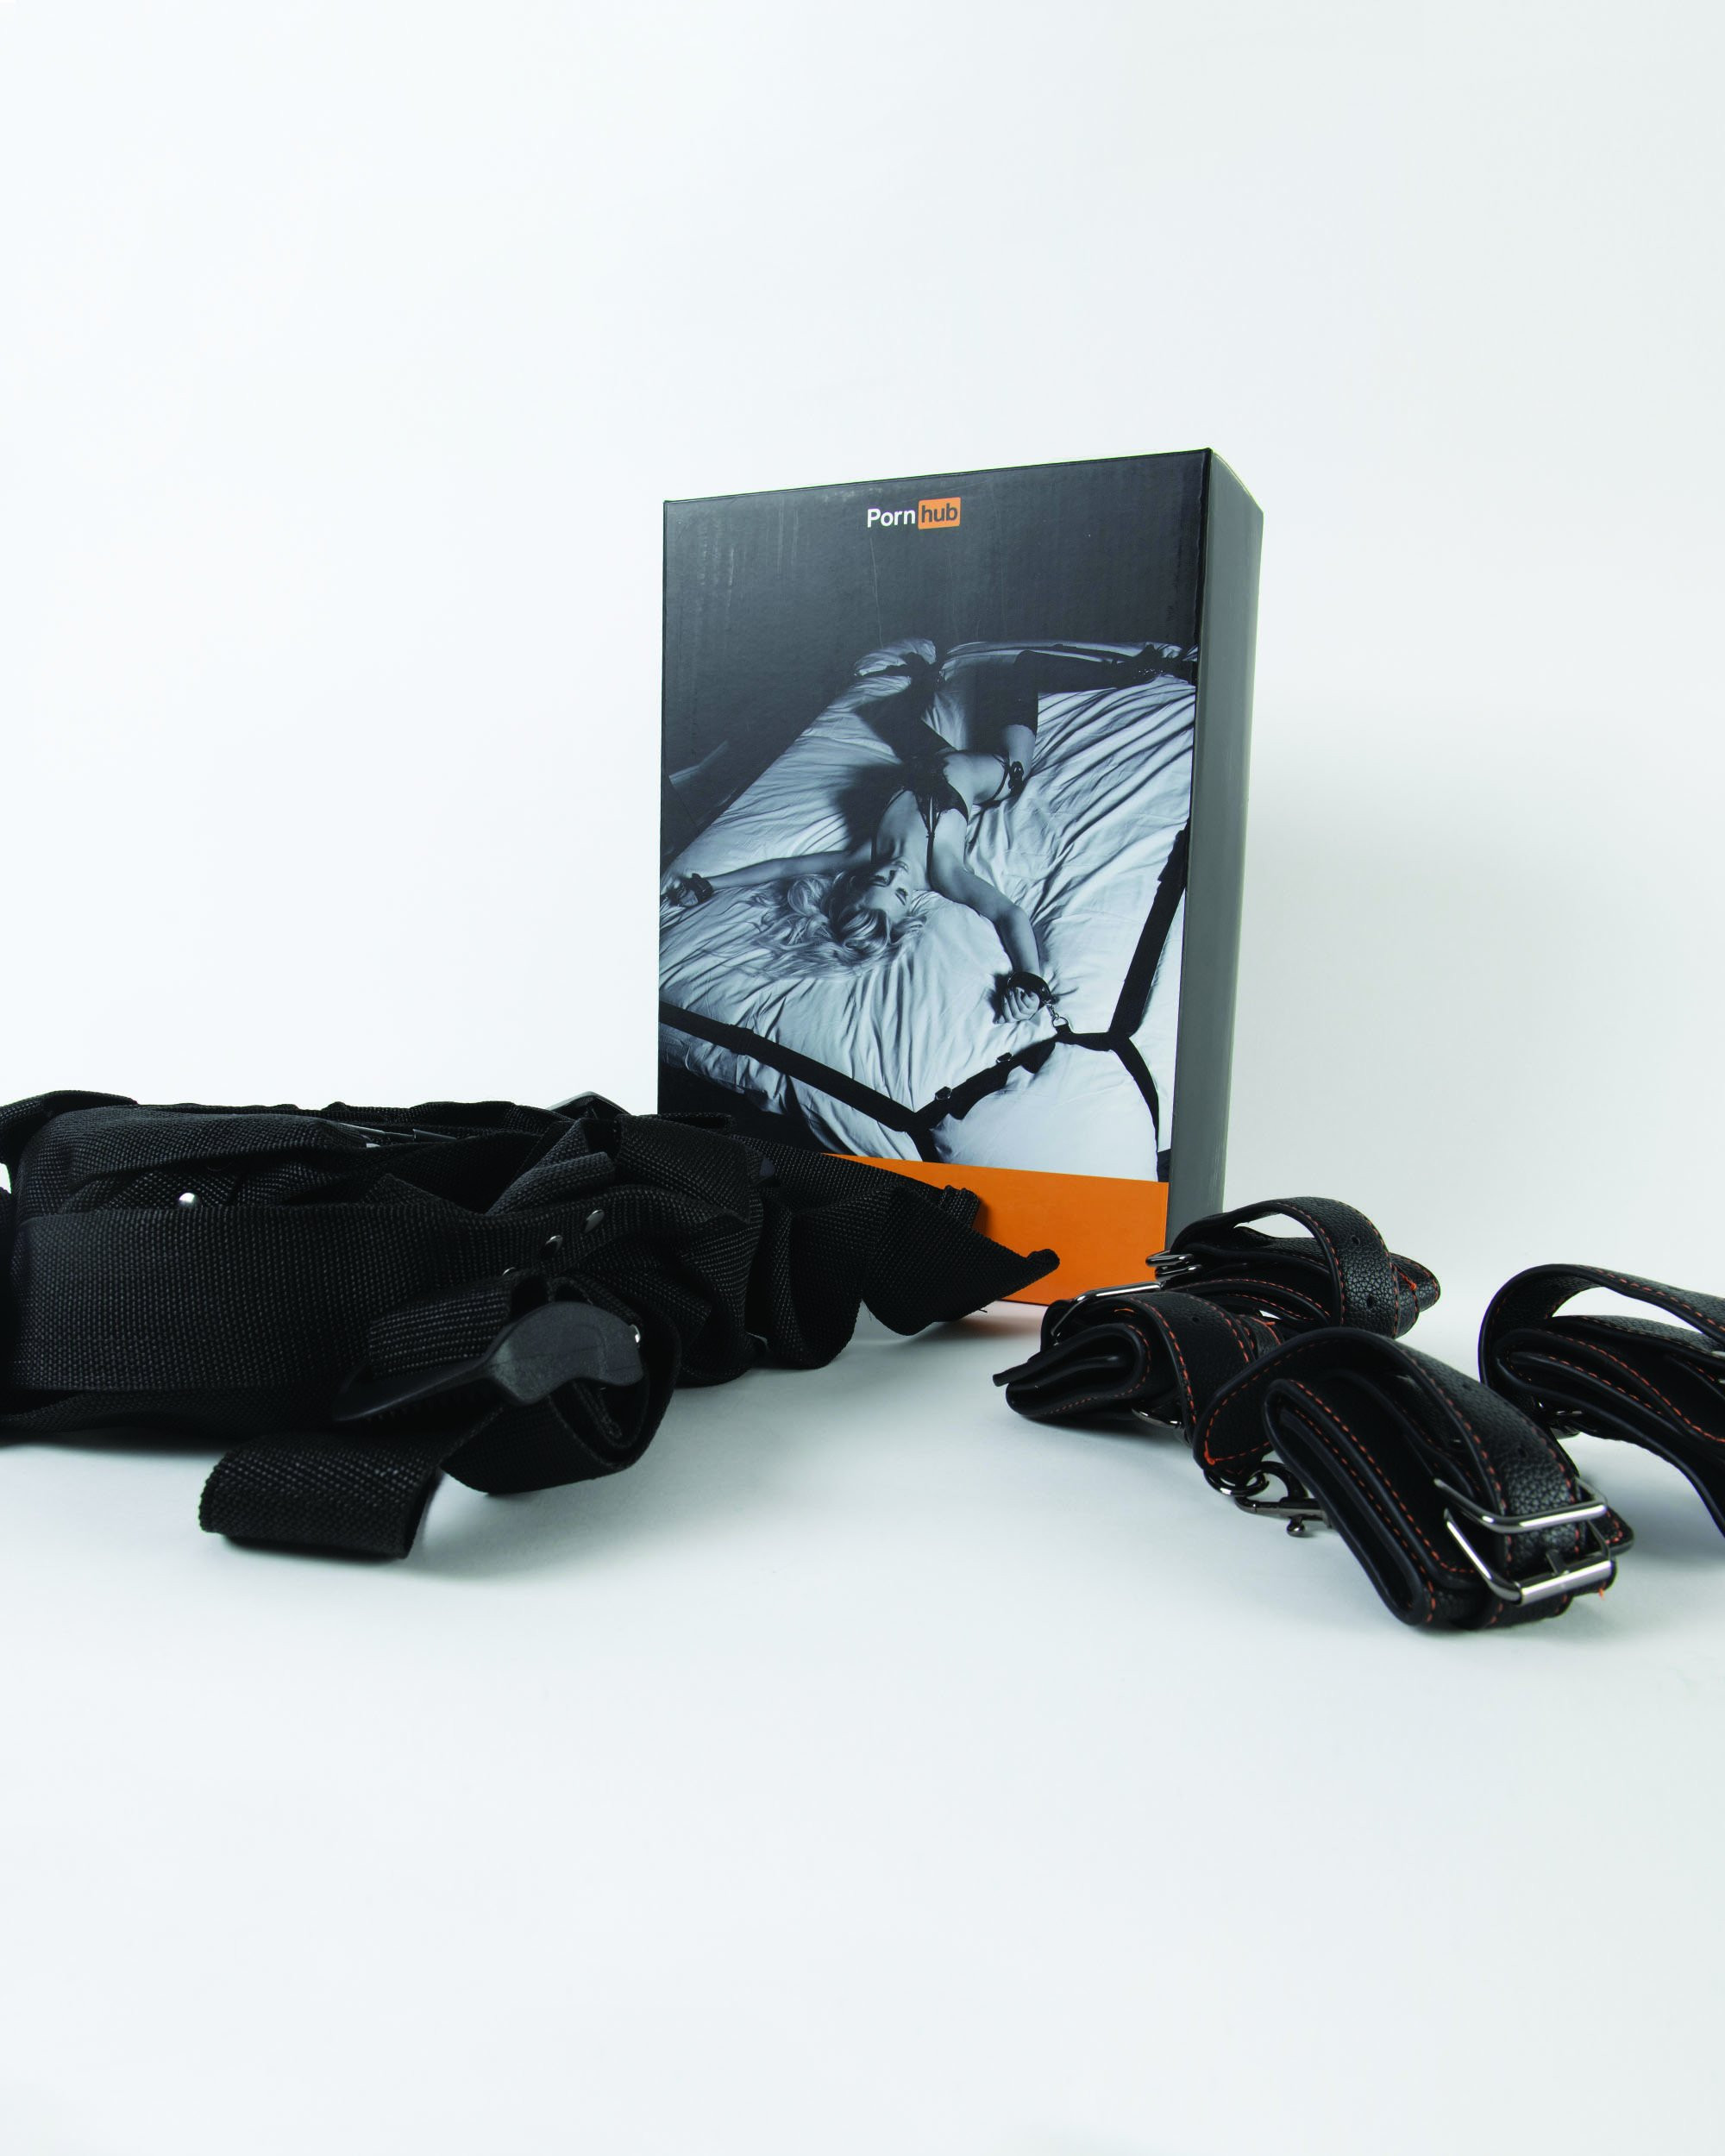 Turn your bedroom into your own bondage chamber. The restraint system features fully adjustable strapping with 8 metal D rings and detachable wrist and ankle buckle cuffs with dog clips for multiple positioning. Designed for complete versatility to giv #sex